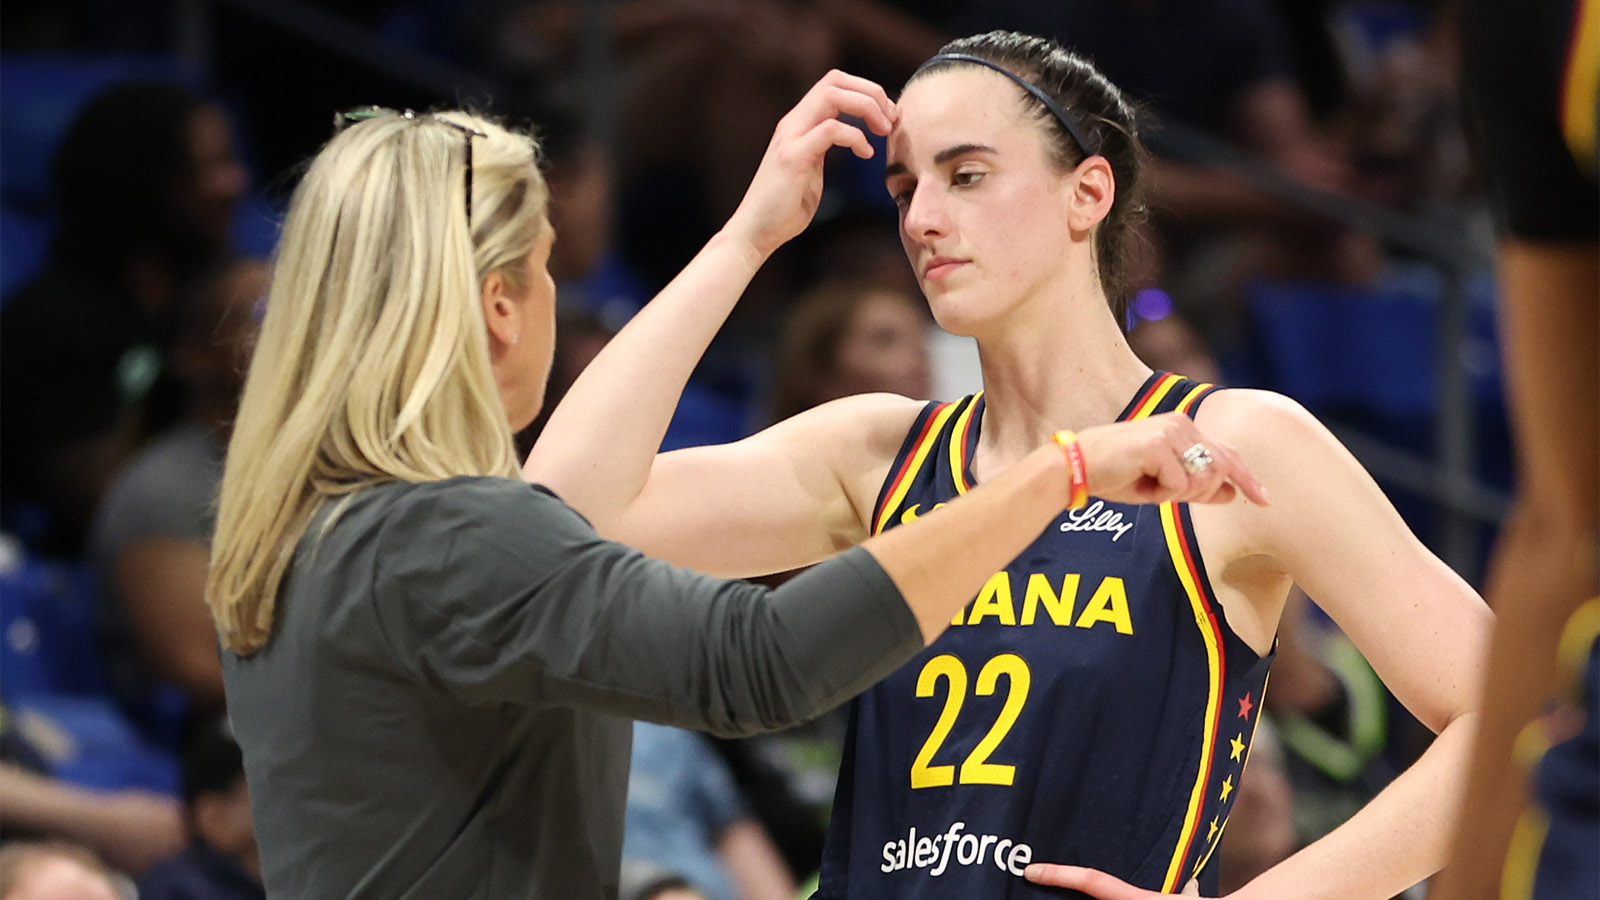 Caitlin Clark Fans Edited Indiana Fever Coach's Wikipedia Page